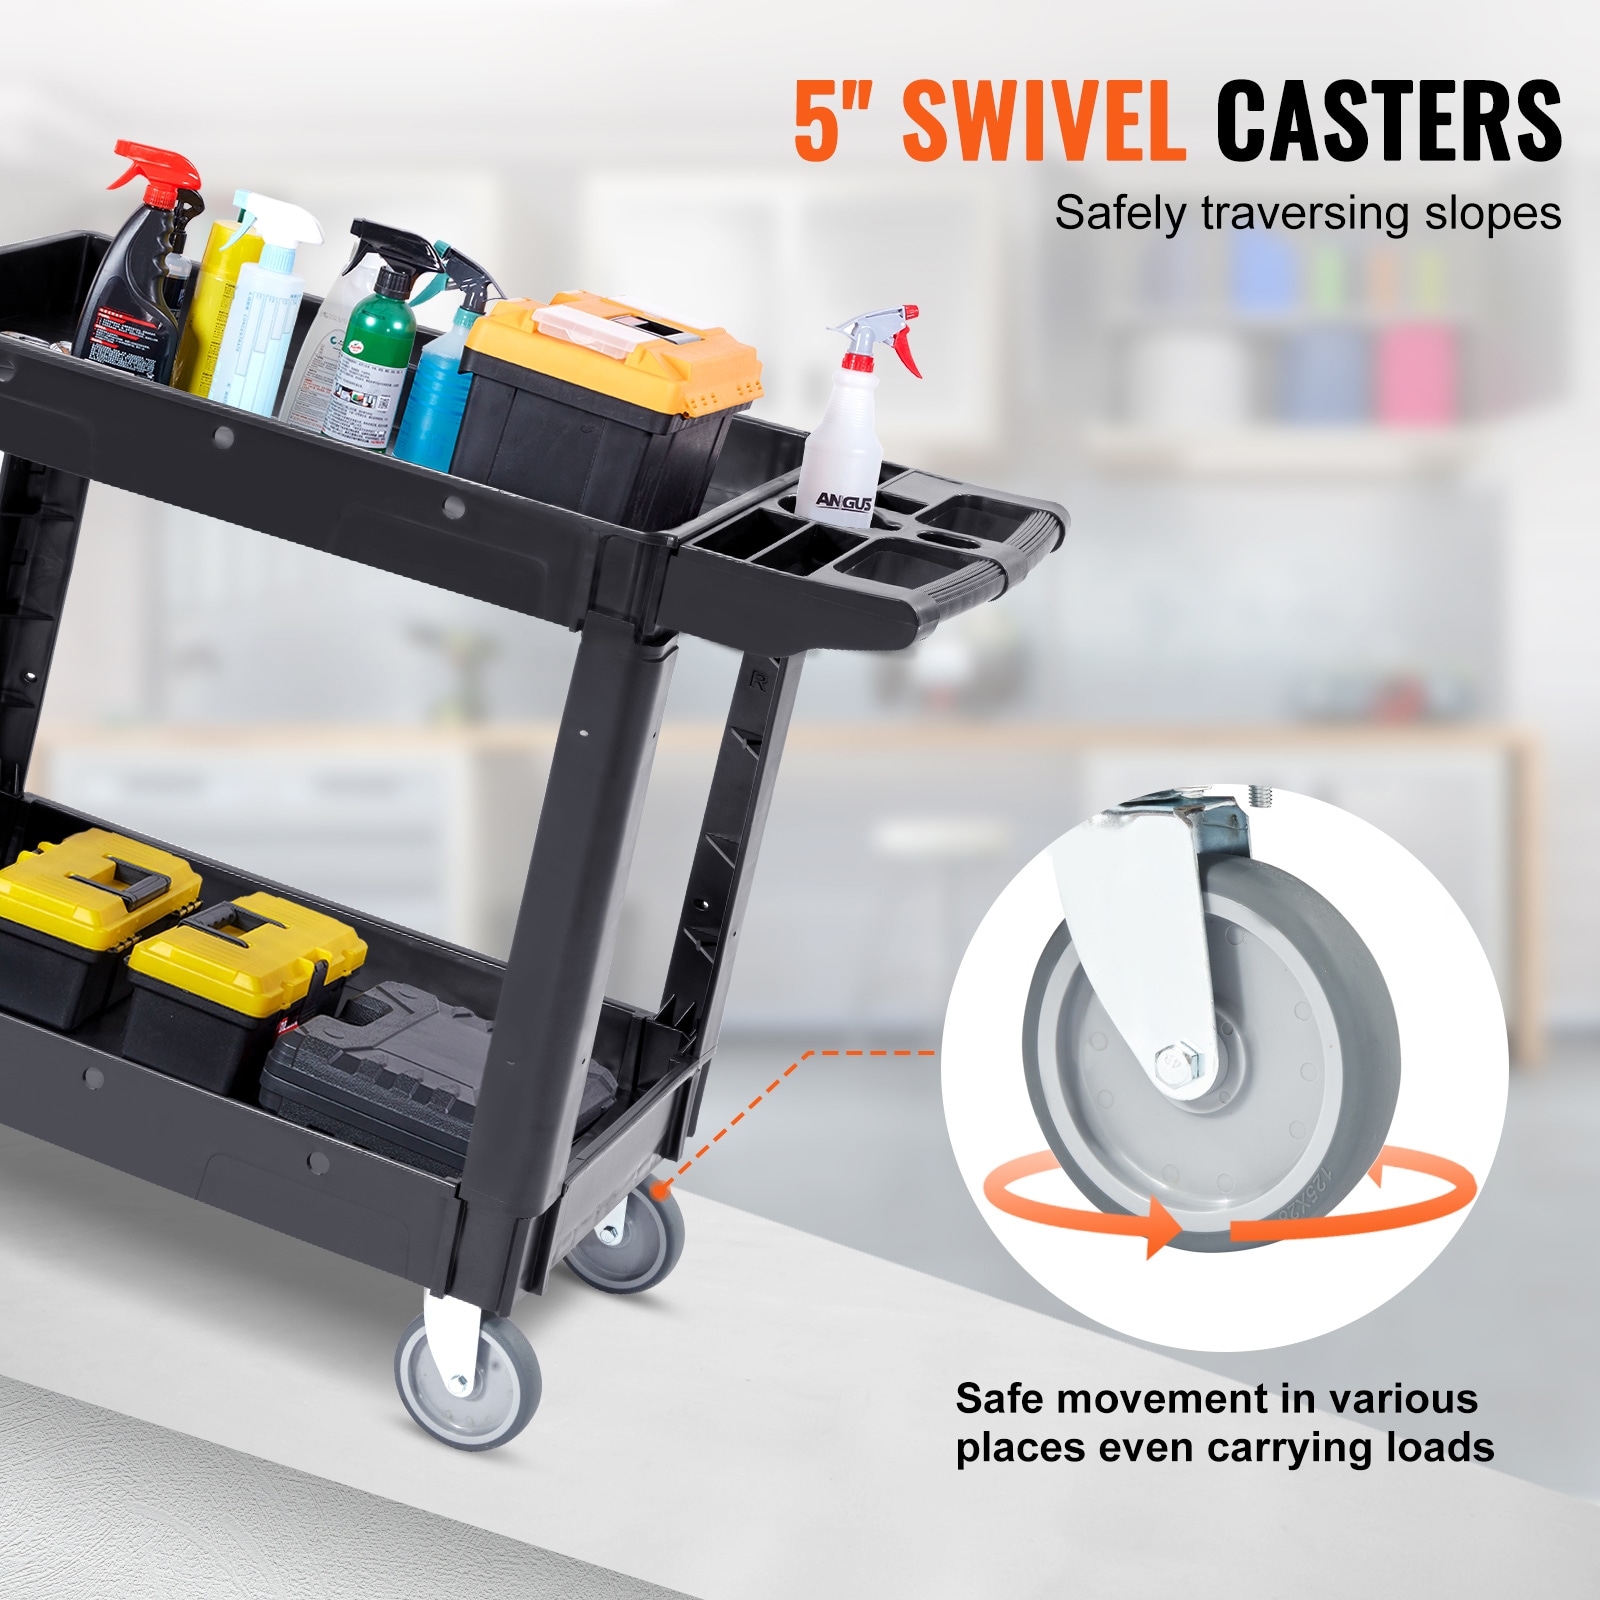 4401 Home and Office Cart, Standard Duty with ergonomic handle and 5 dia.  (12.7 cm) x 1 1/4 w Casters